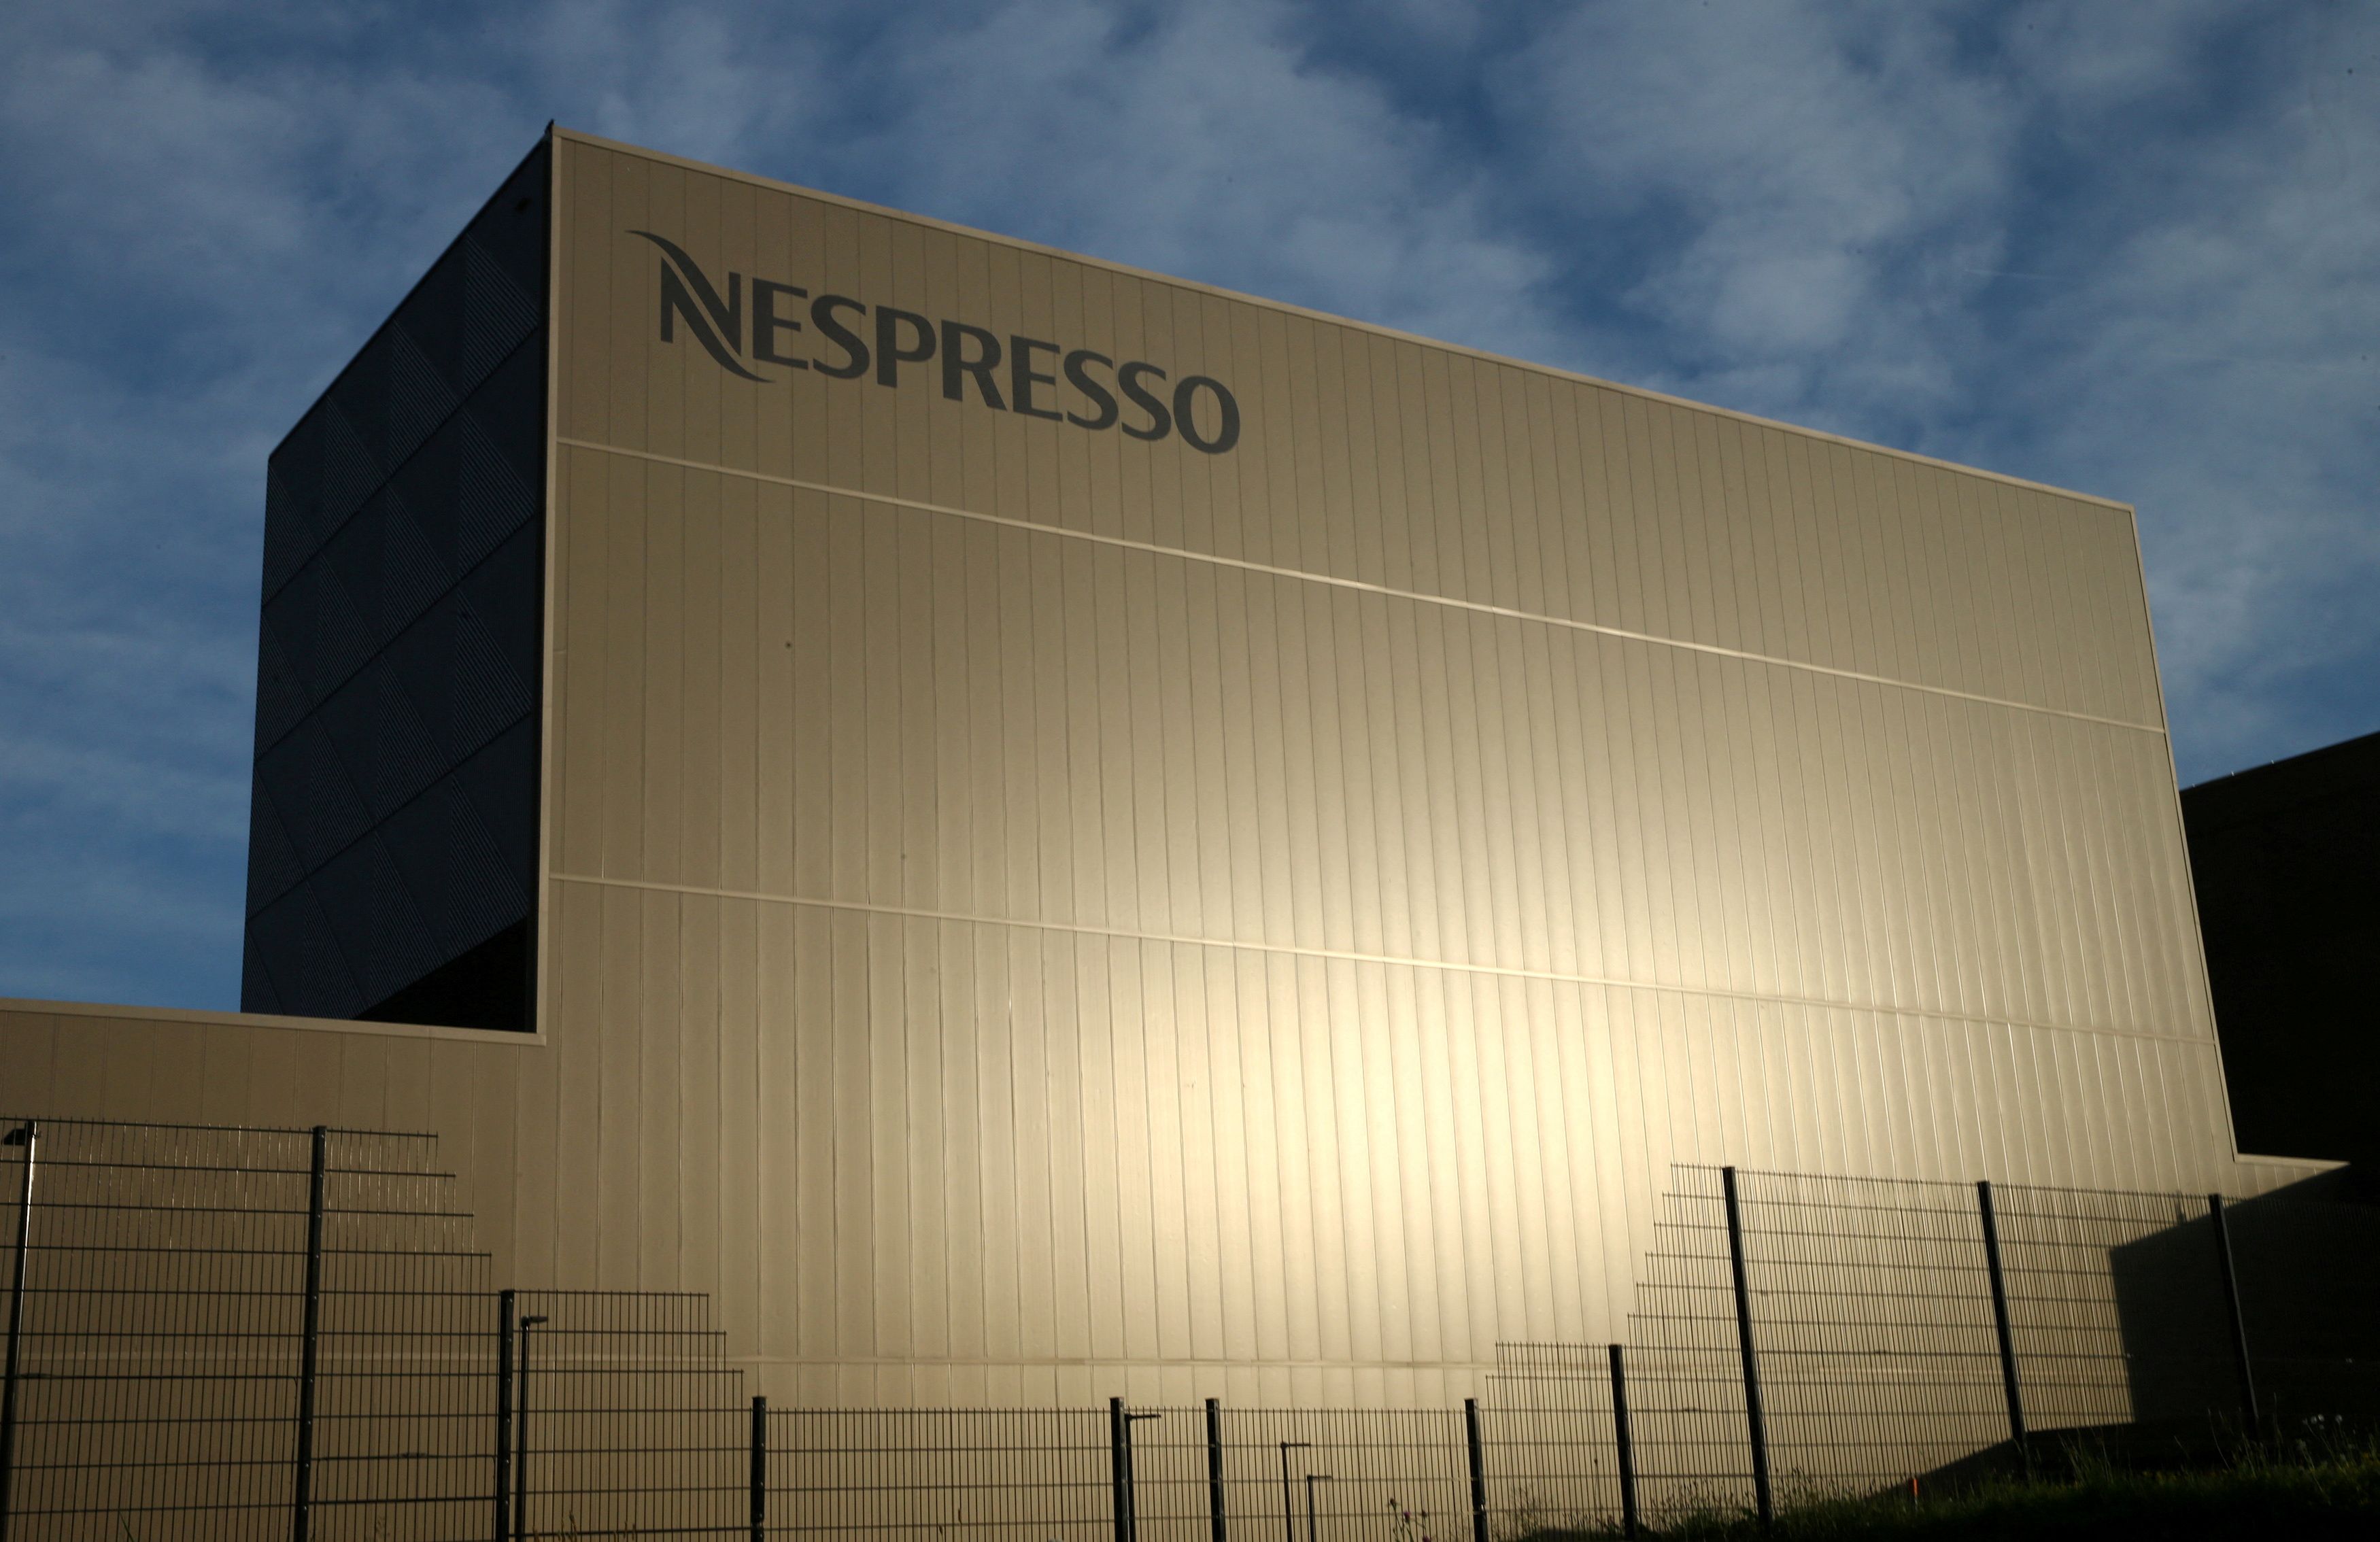 The production plant of coffee pod maker Nespresso is pictured in Romont